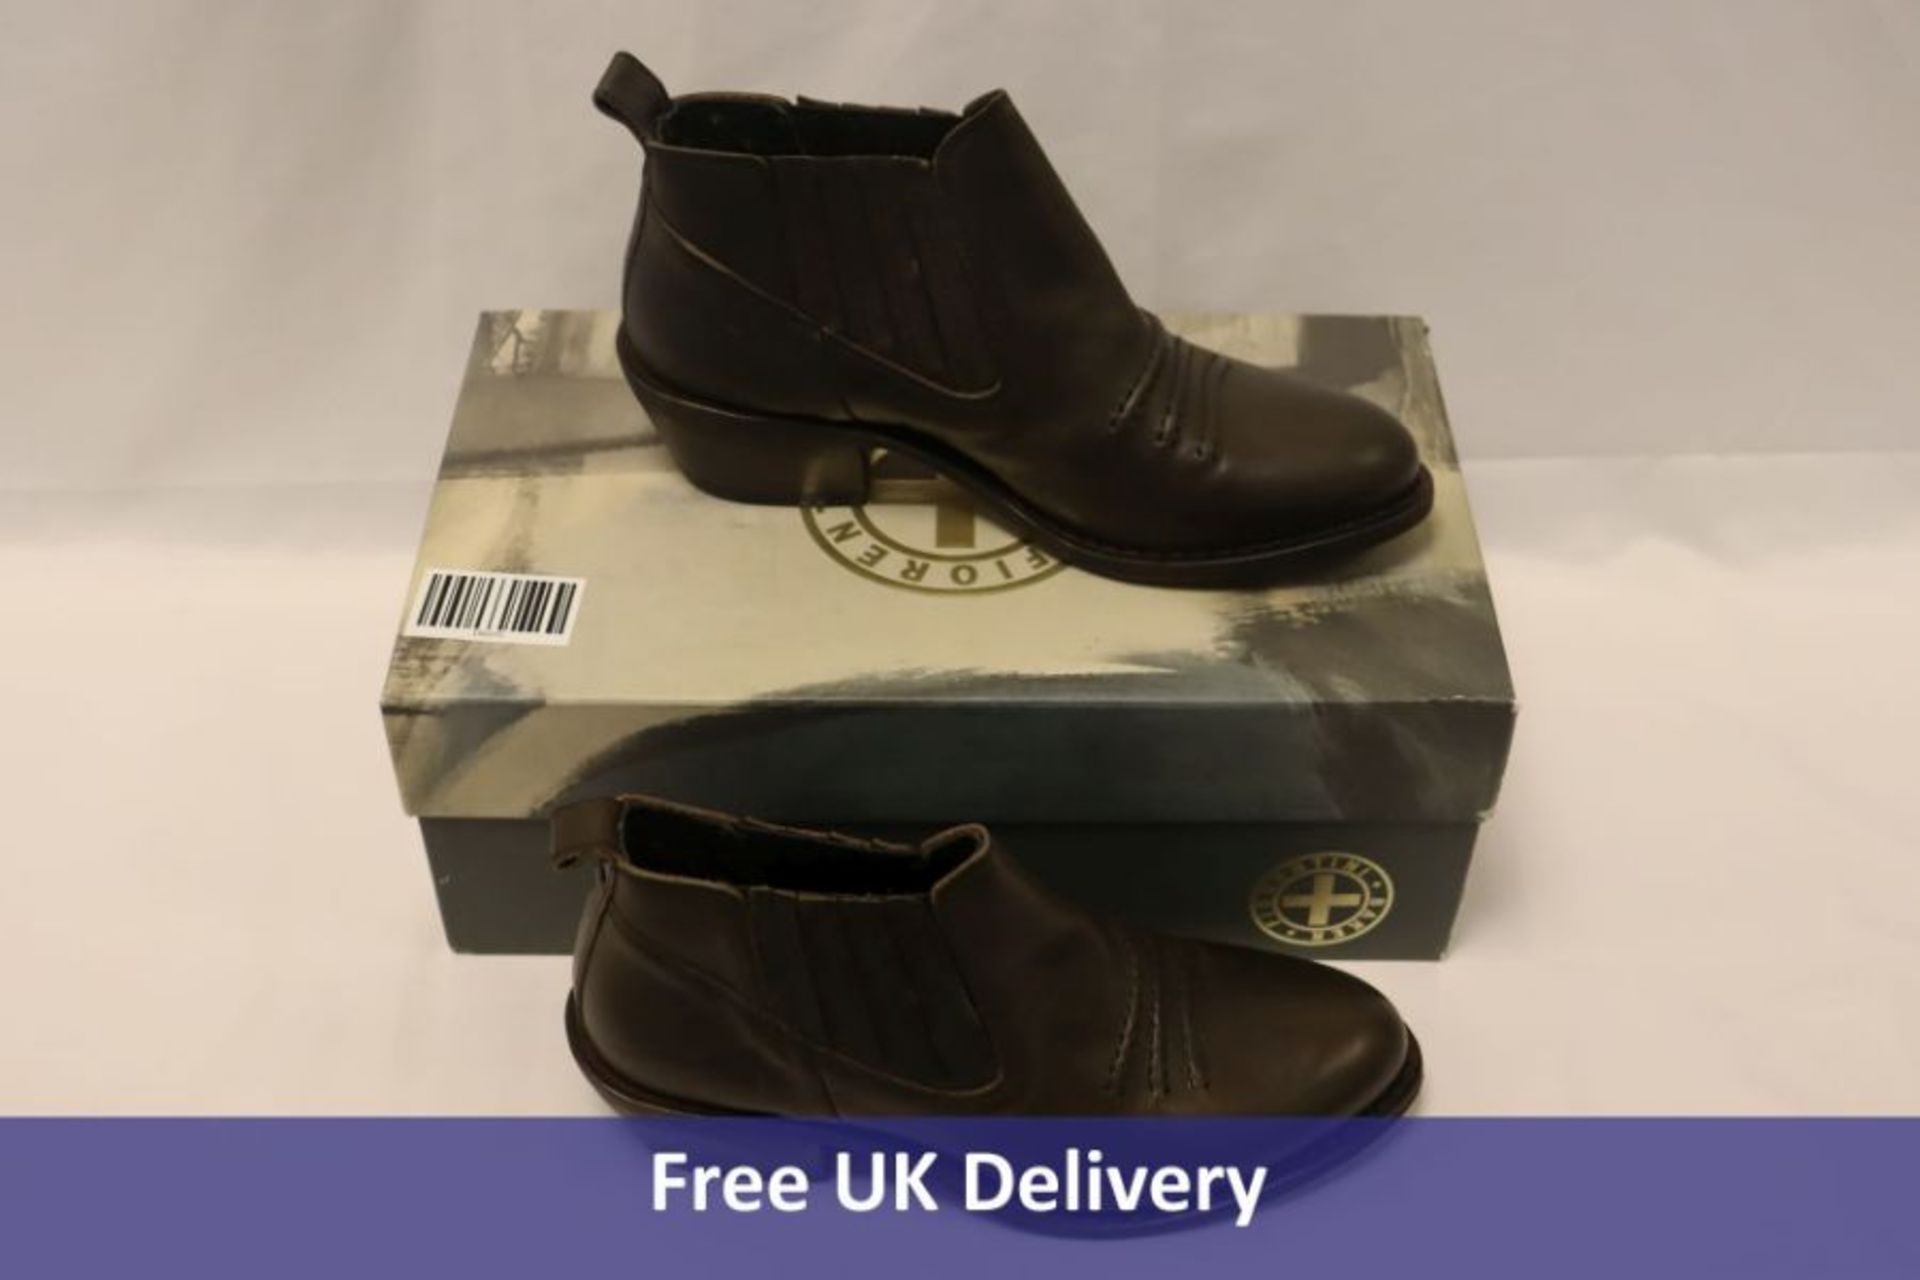 Fiorentini+Baker Raby-19 Boots, Brown UK 4